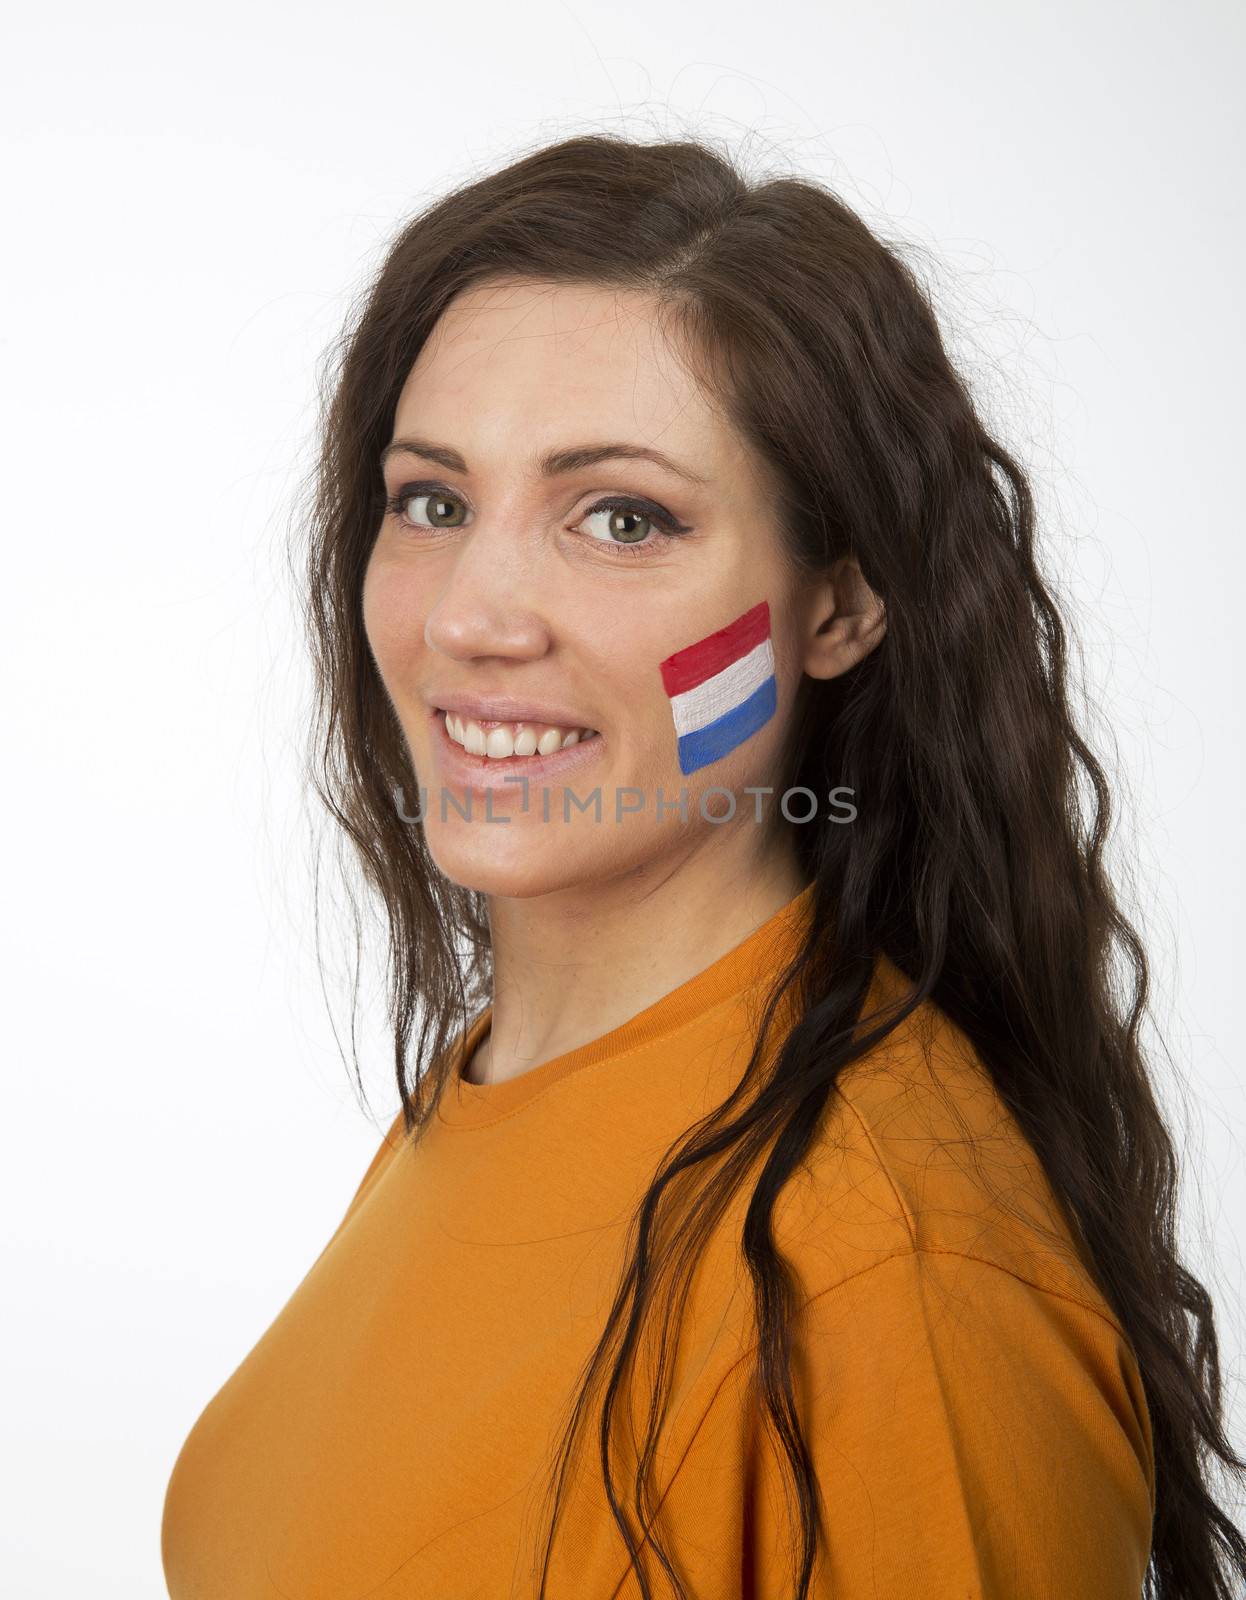 Young Girl with the Dutch flag painted in her face